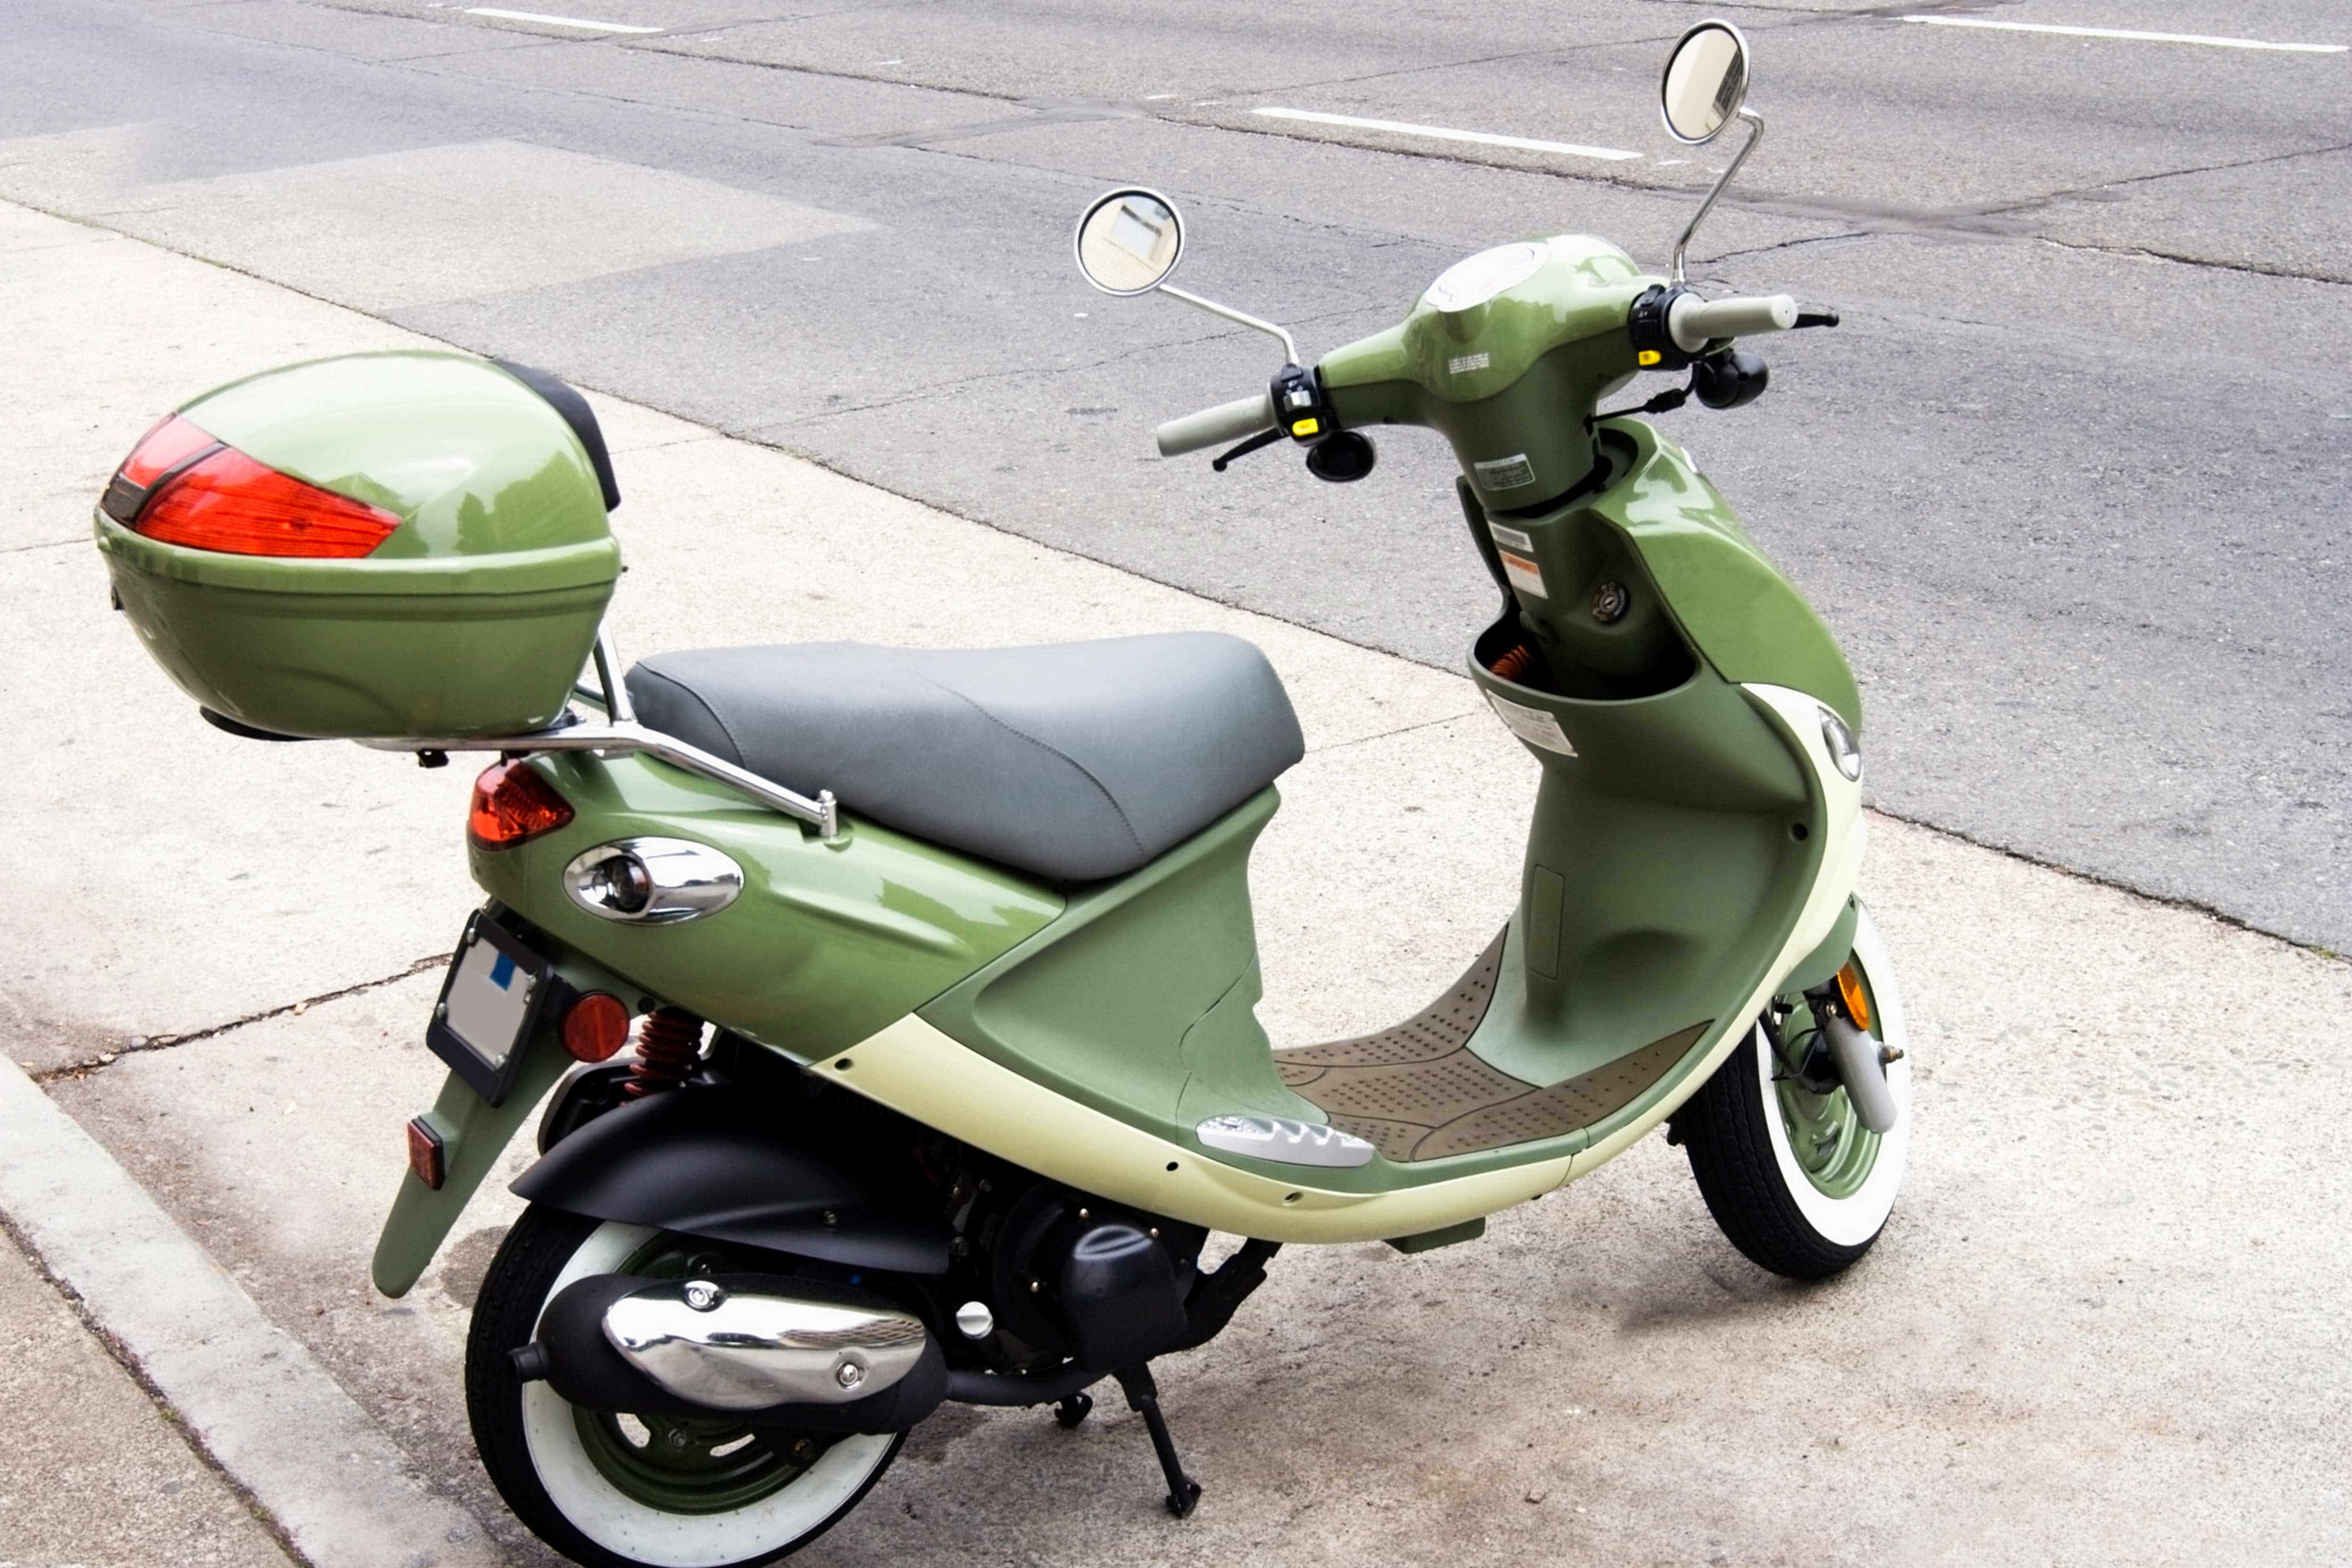 Here are the steps to take during a moped driving course.